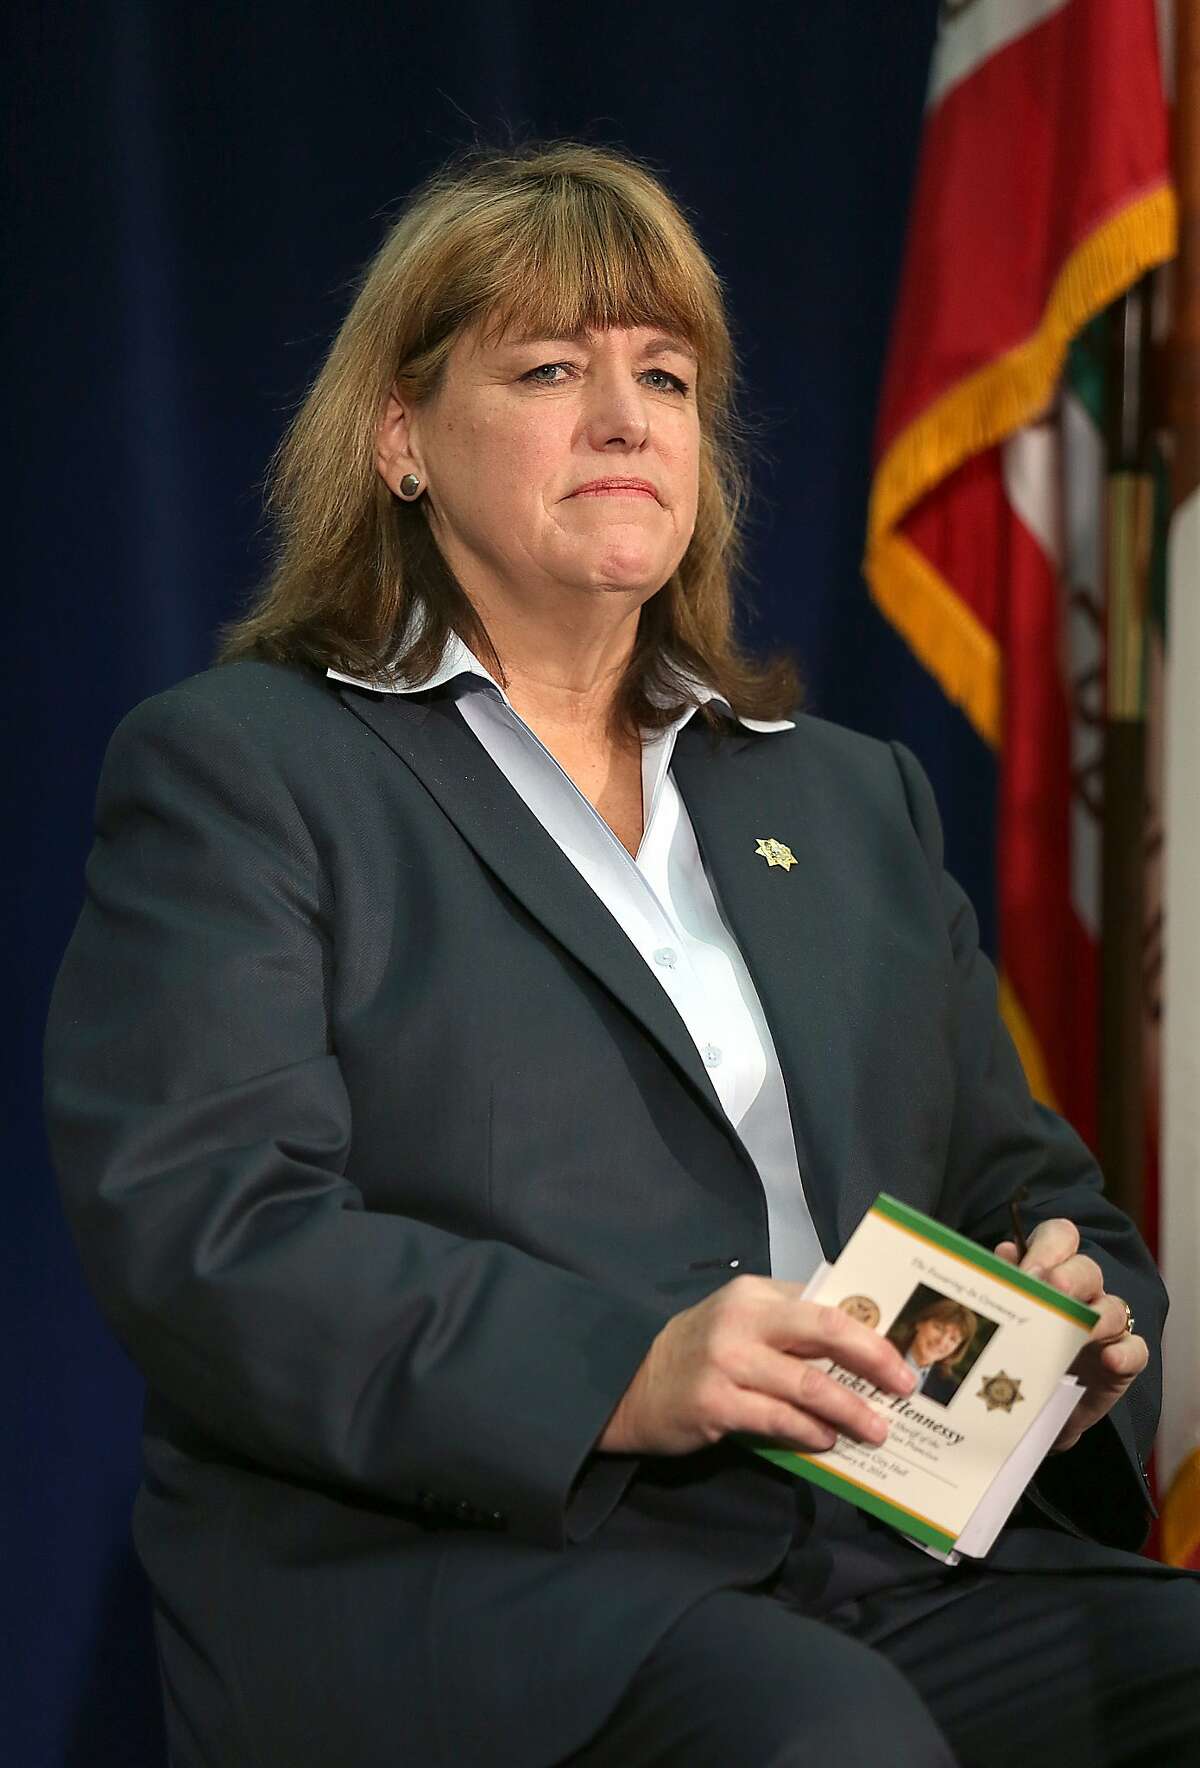 Sheriff-elect Vicki Hennessy iwaits to be sworn into office at city hall in San Francisco, California, on Friday, January 8, 2015.